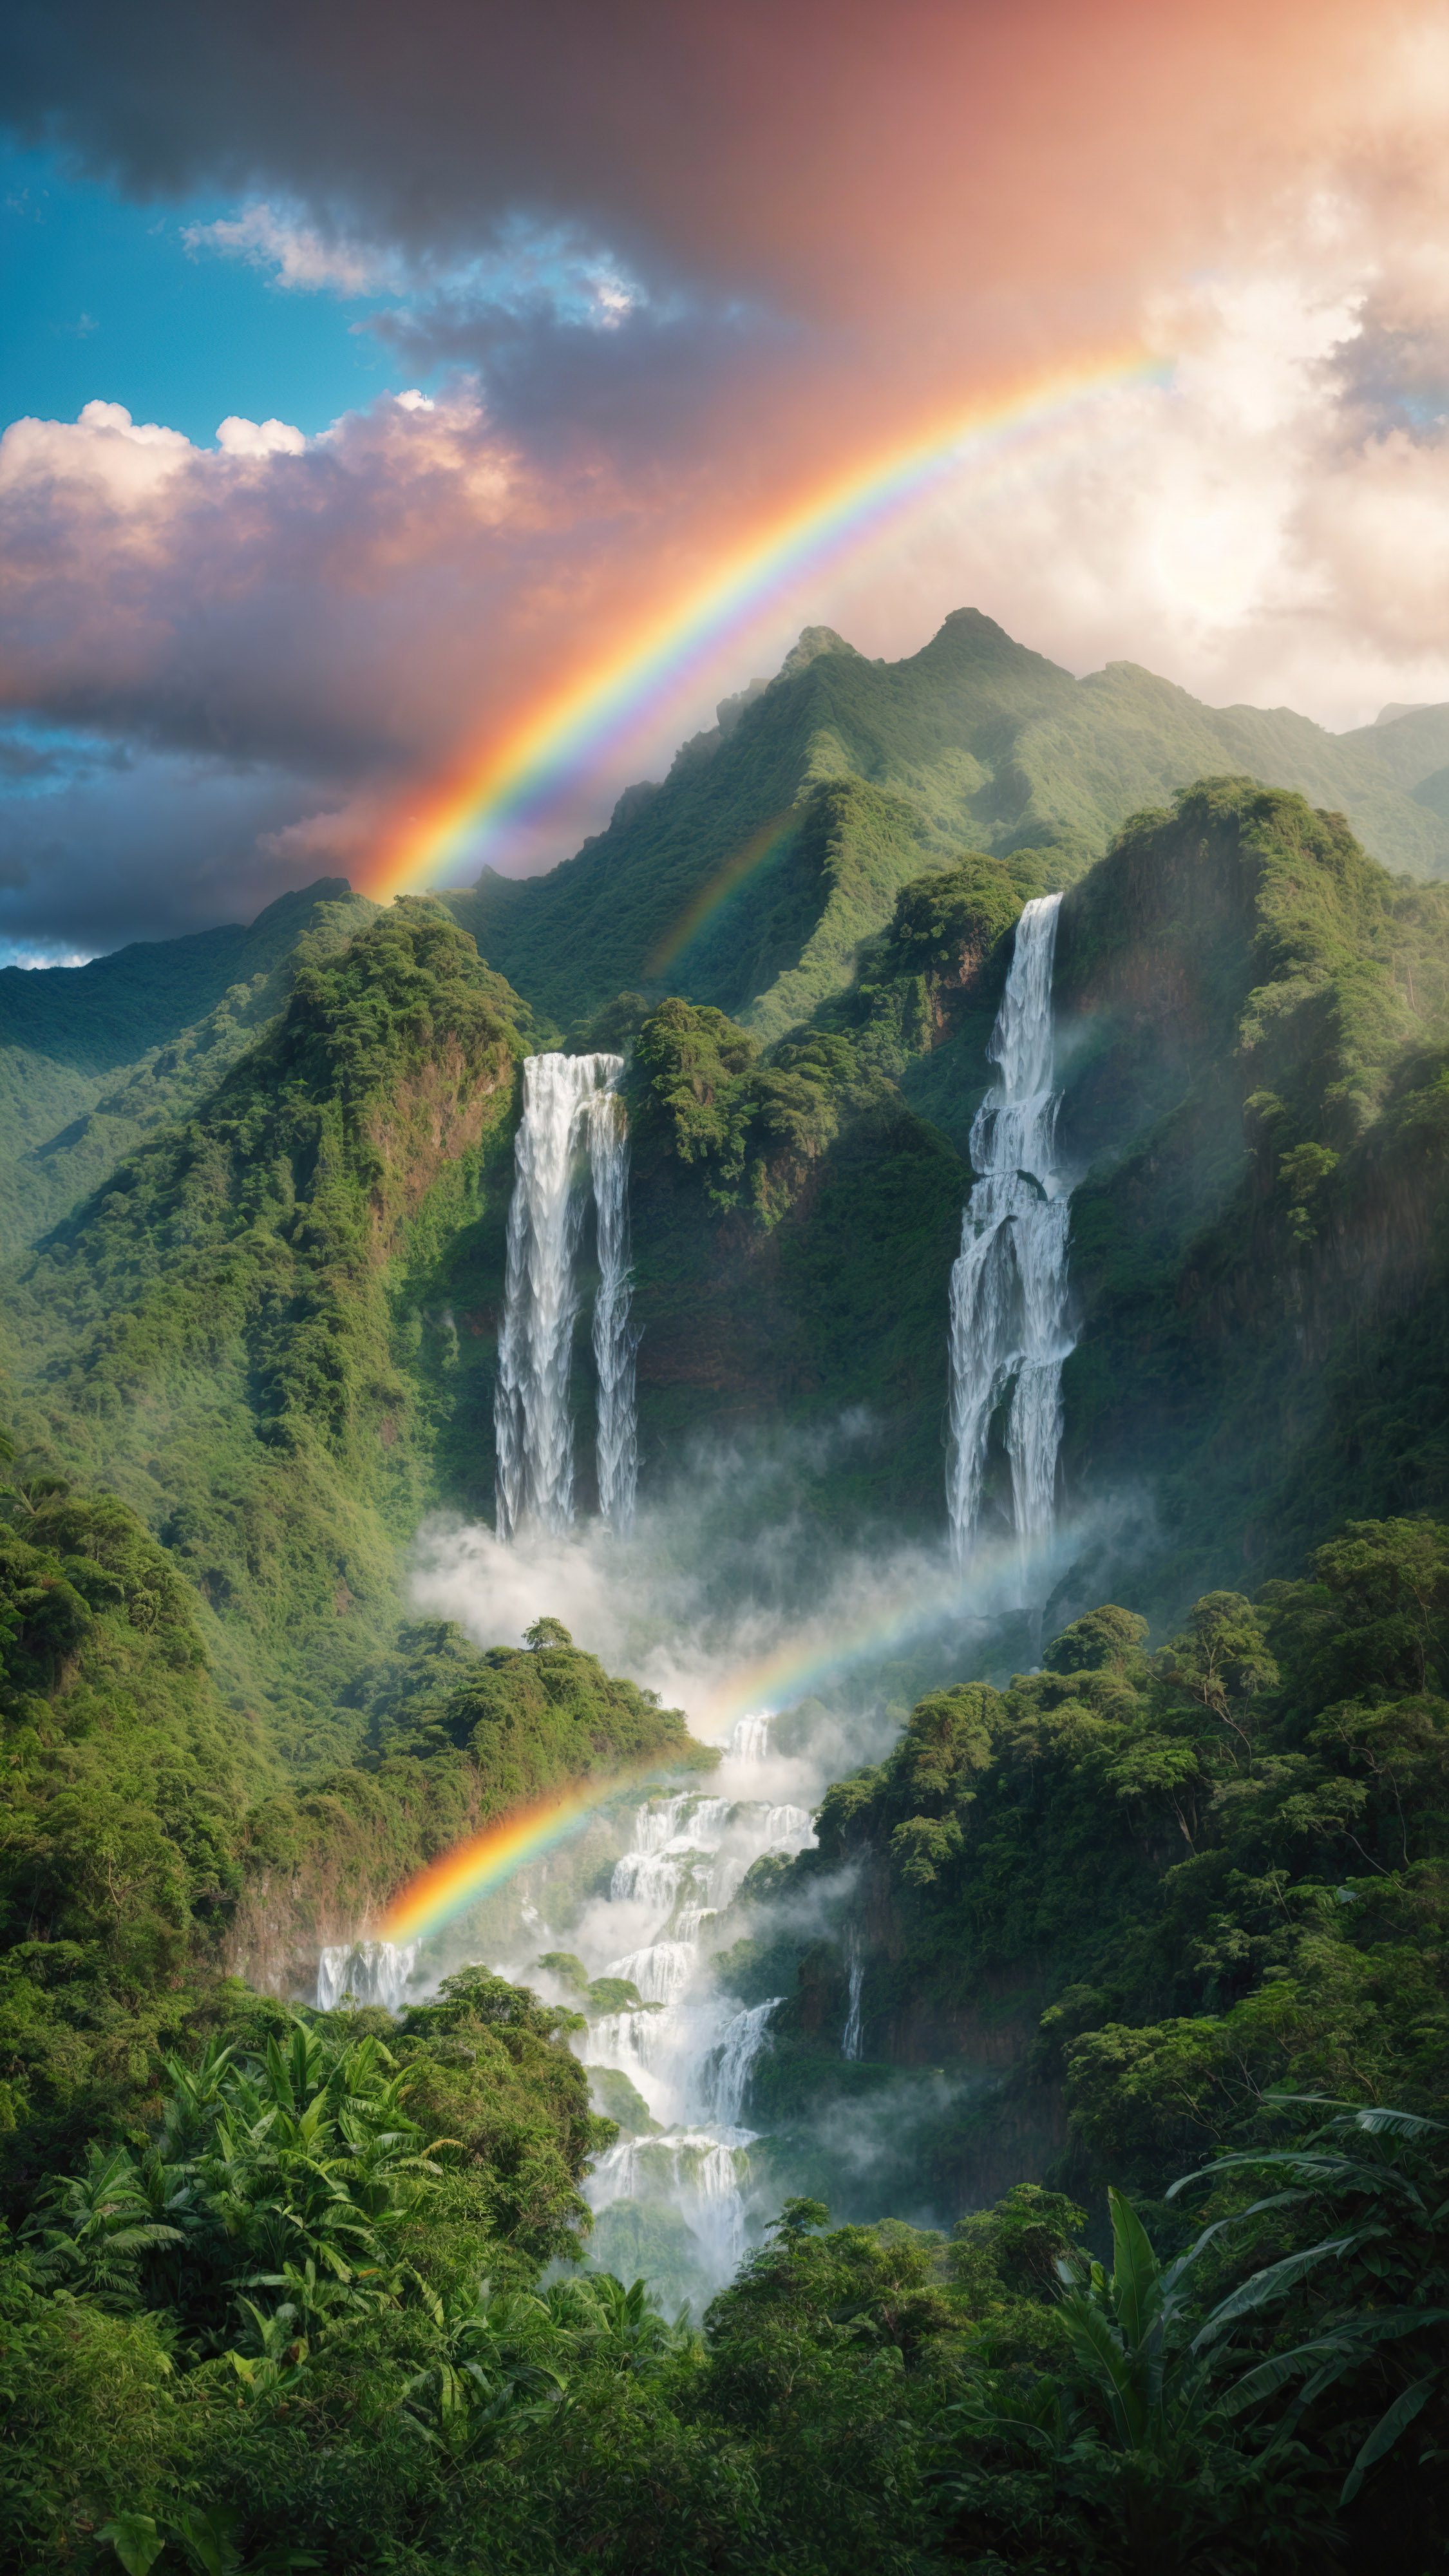 Immerse yourself in the lushness of a tropical mountain with a jungle and a waterfall, complemented by a rainbow and a blue sky, with our 4K mountain wallpaper for iPhone.